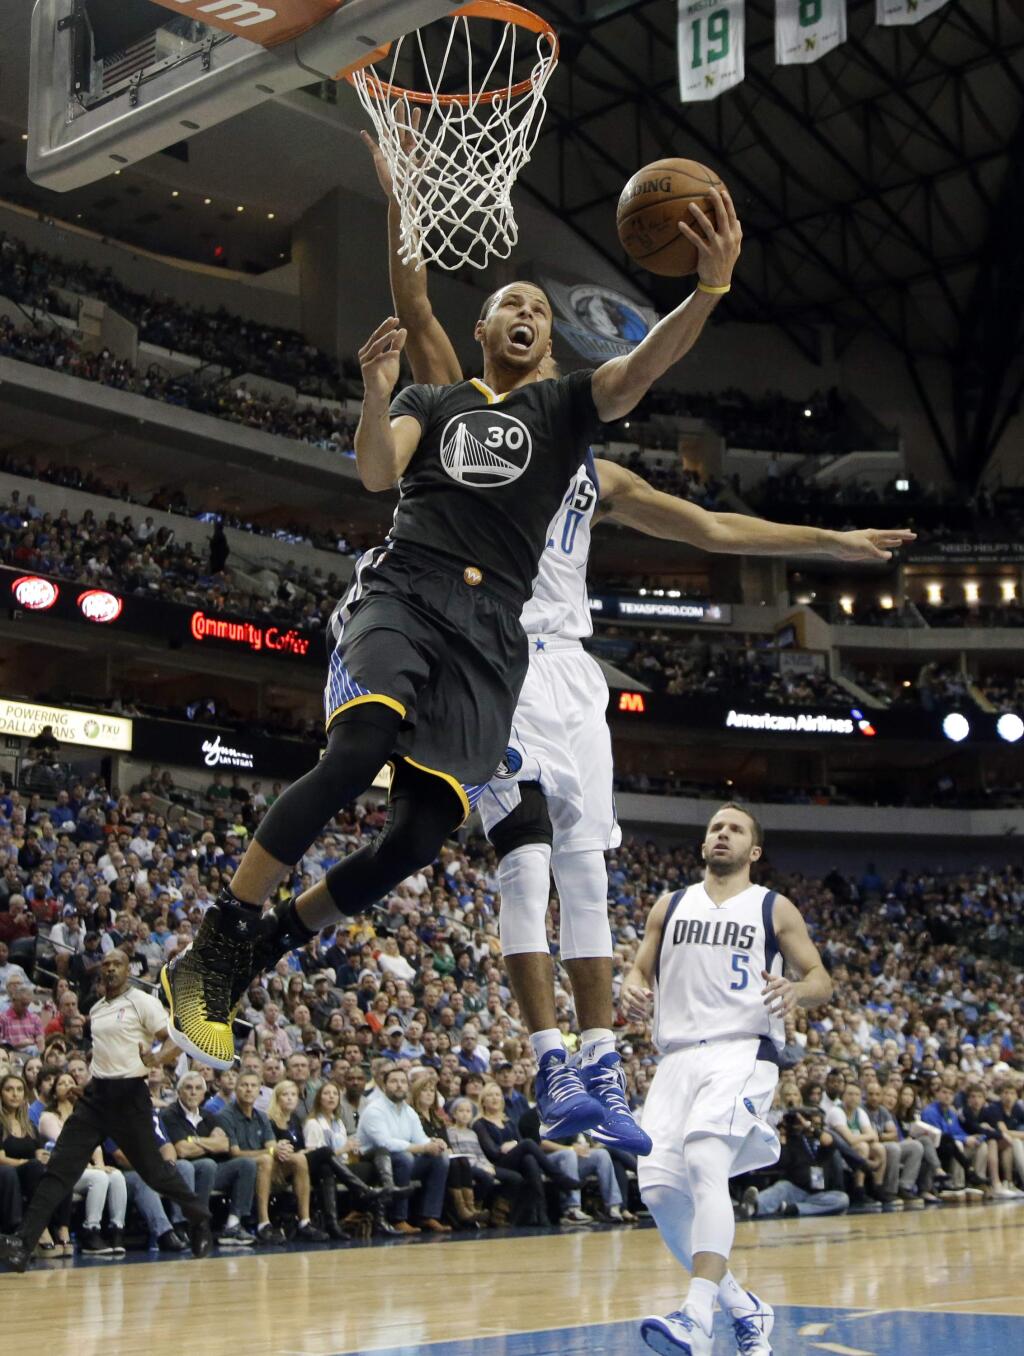 Golden State Warriors guard Stephen Curry (30) gets by Dallas Mavericks' Devin Harris, rear, for a reverse layup in the first half of a game, Saturday, Dec. 13, 2014, in Dallas. (AP Photo/Tony Gutierrez)